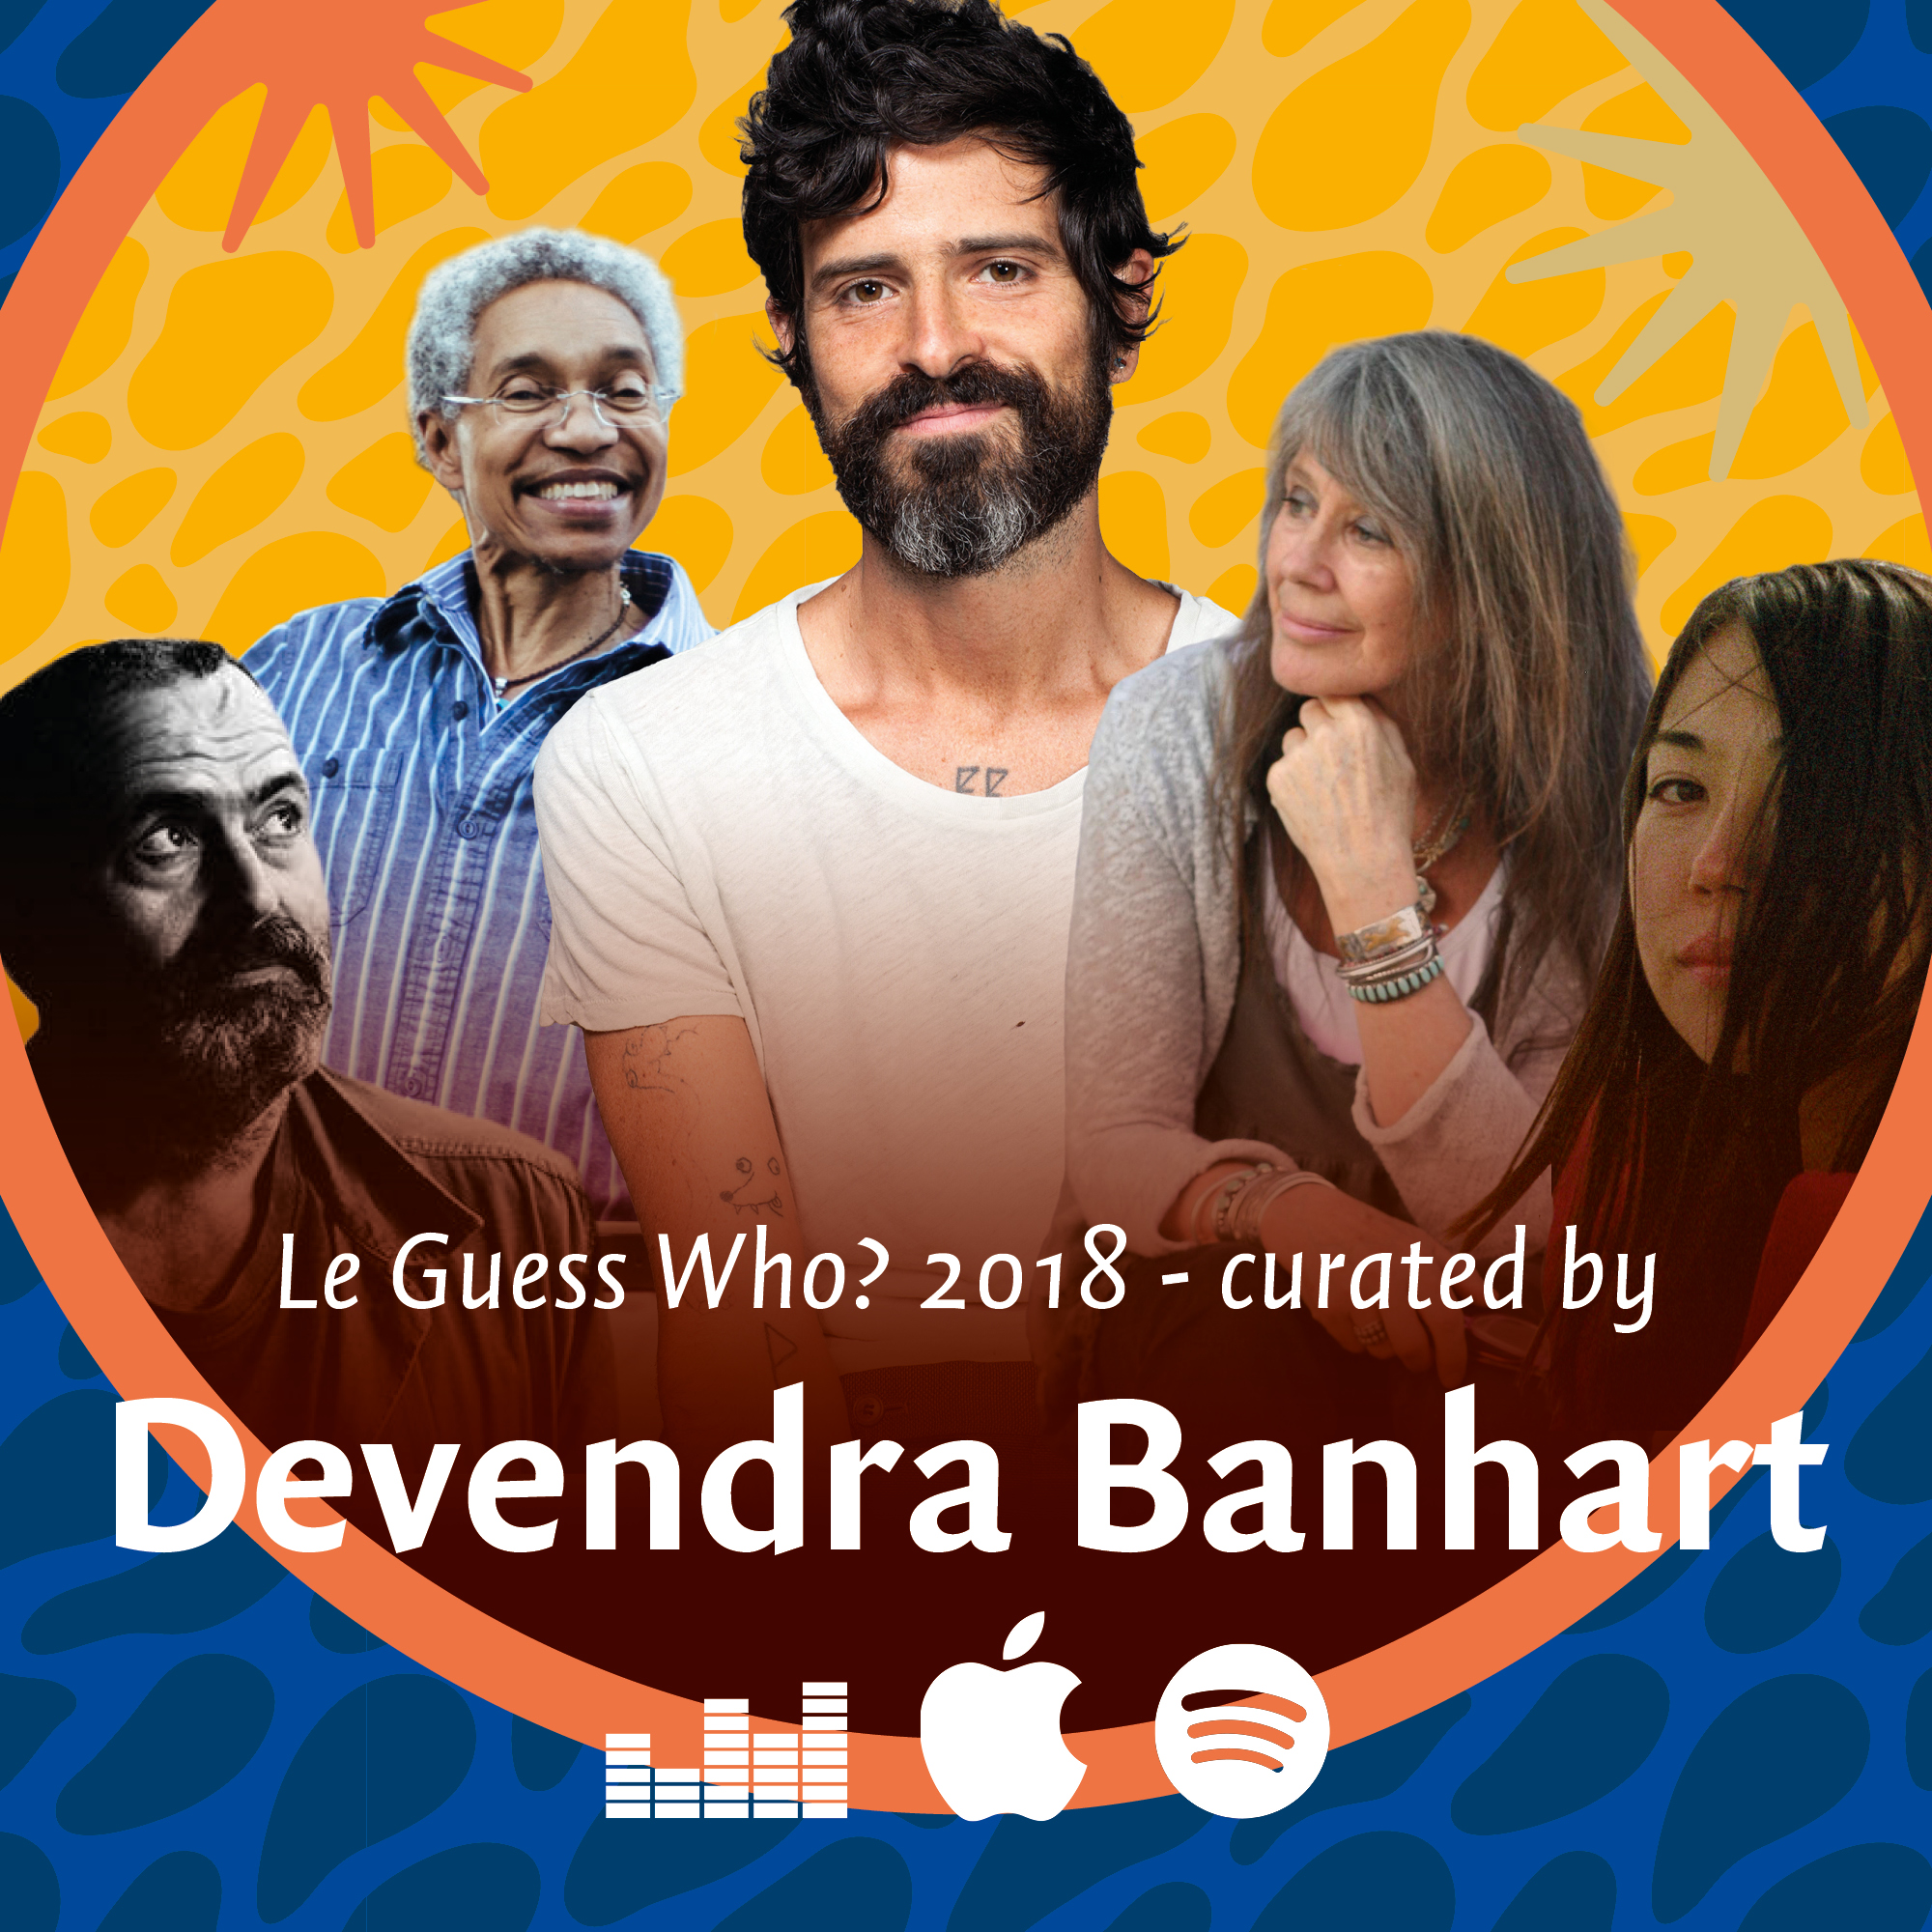 Listen to Devendra Banhart's personal playlist for his curated program at LGW18